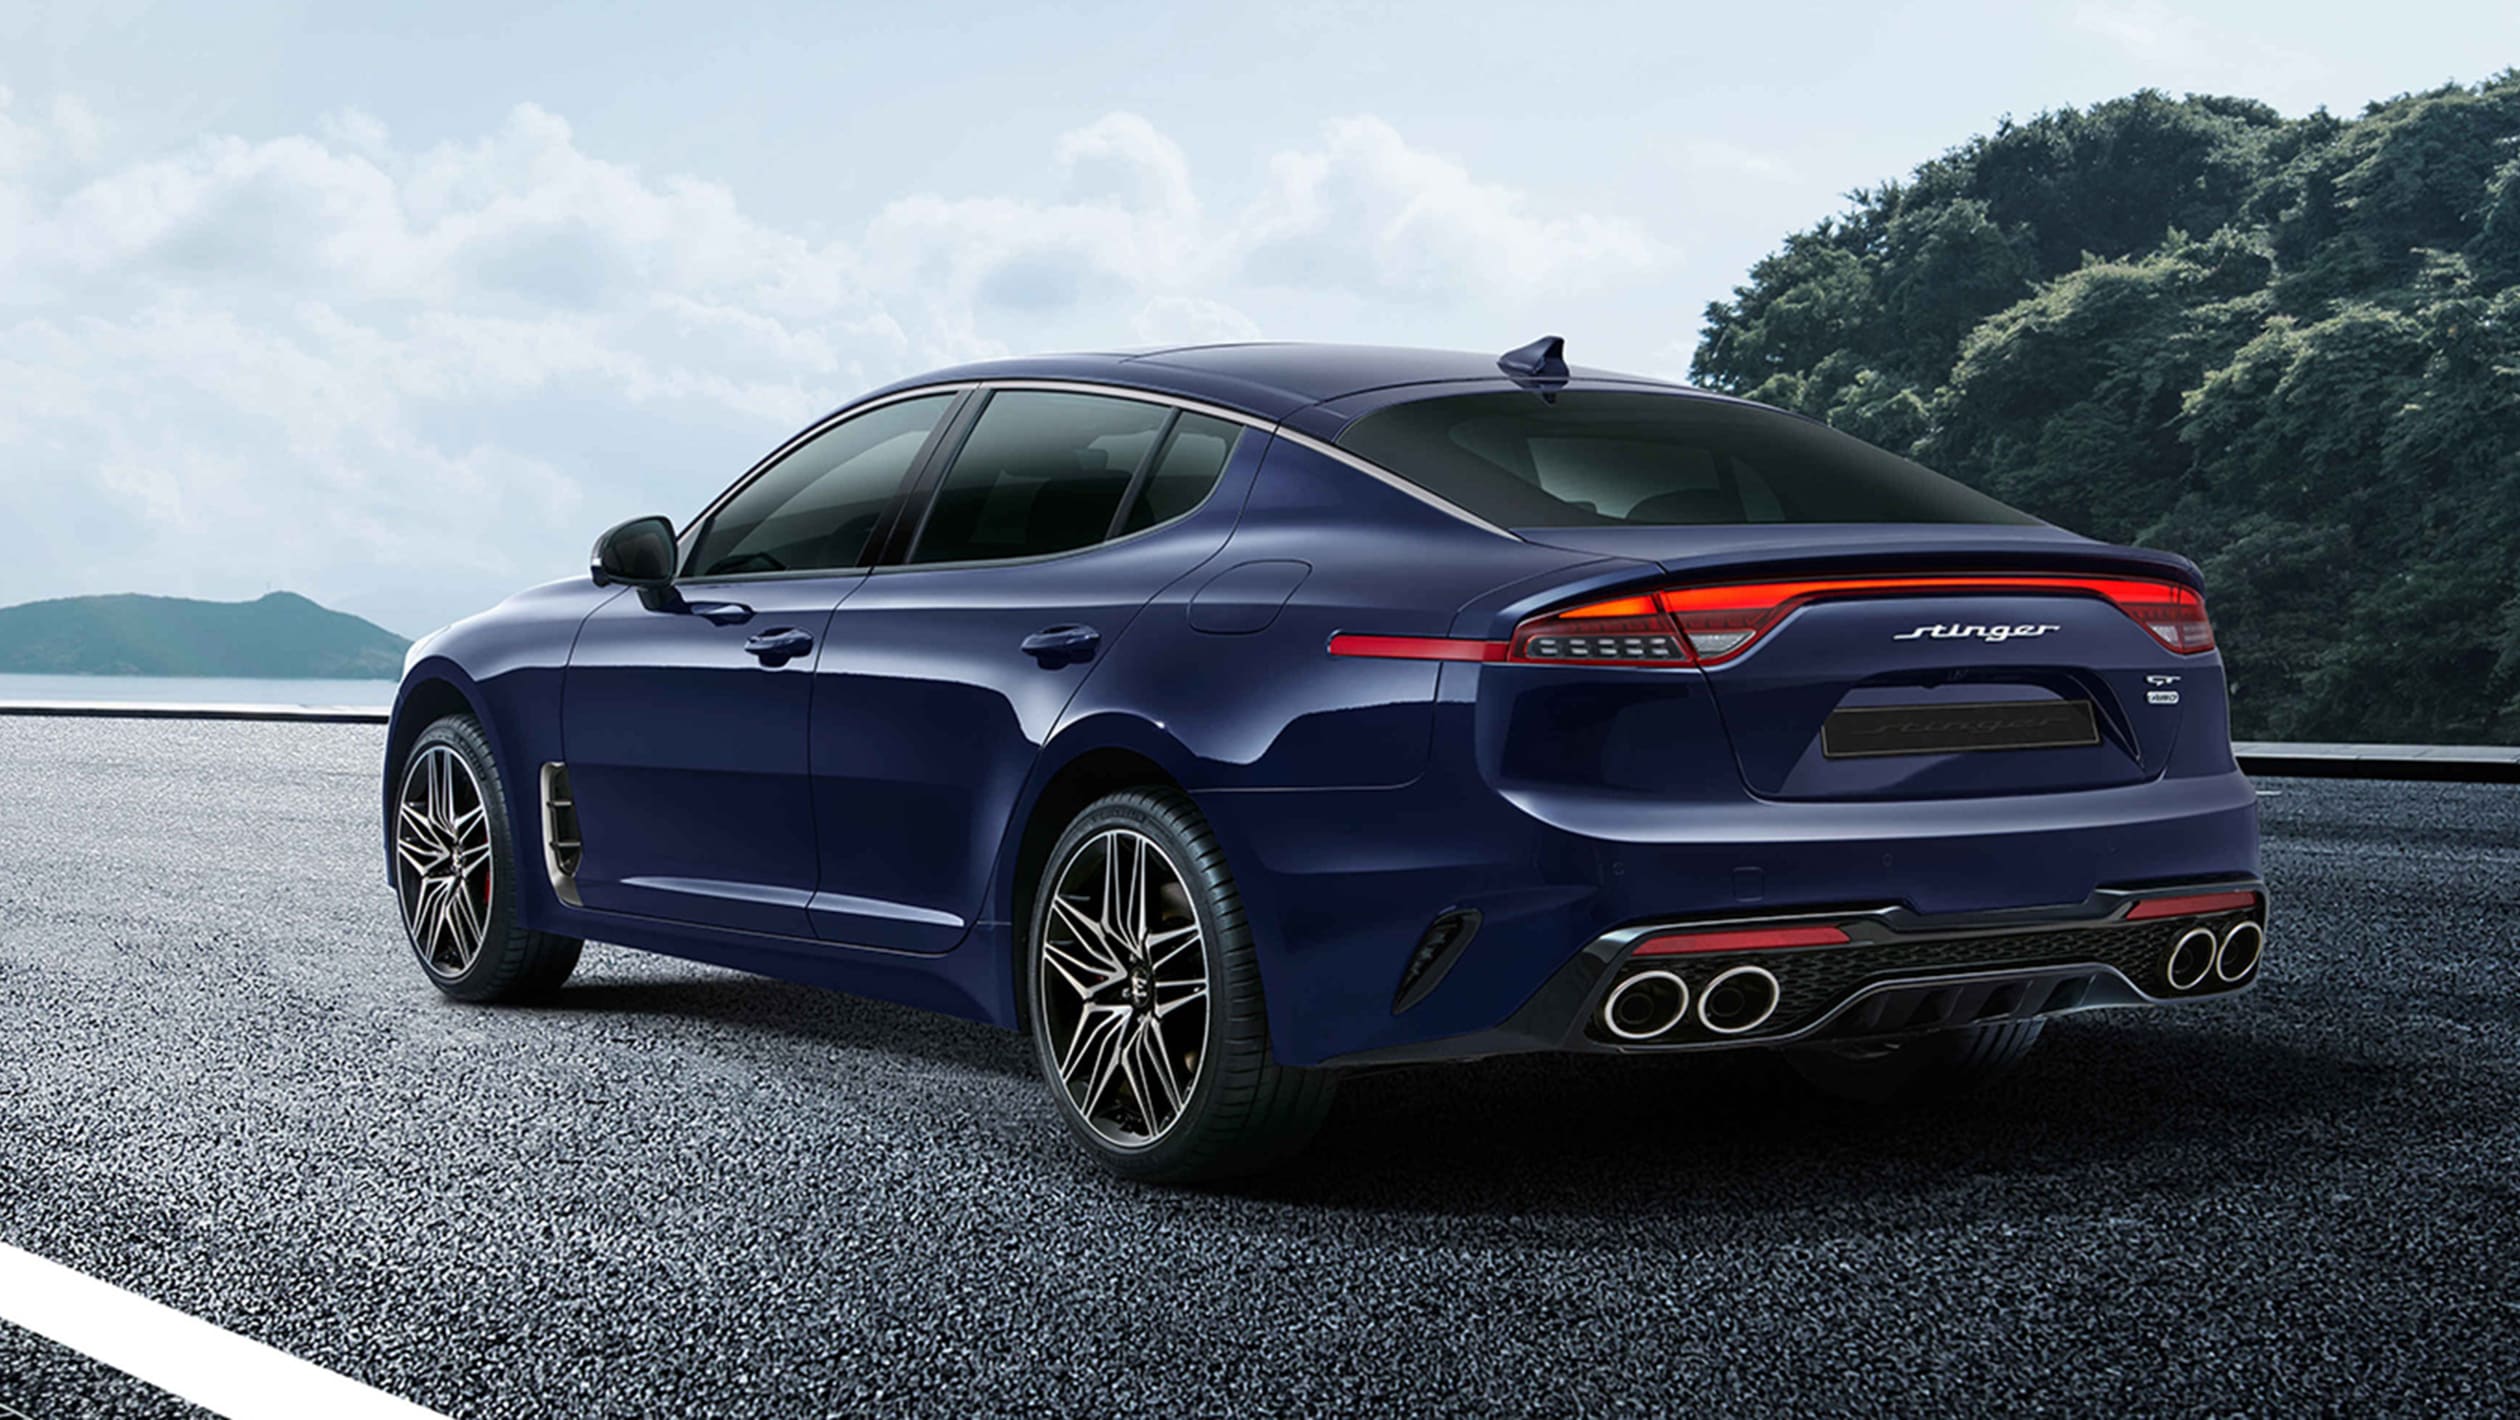 Facelifted 2020 Kia Stinger breaks cover pictures Carbuyer